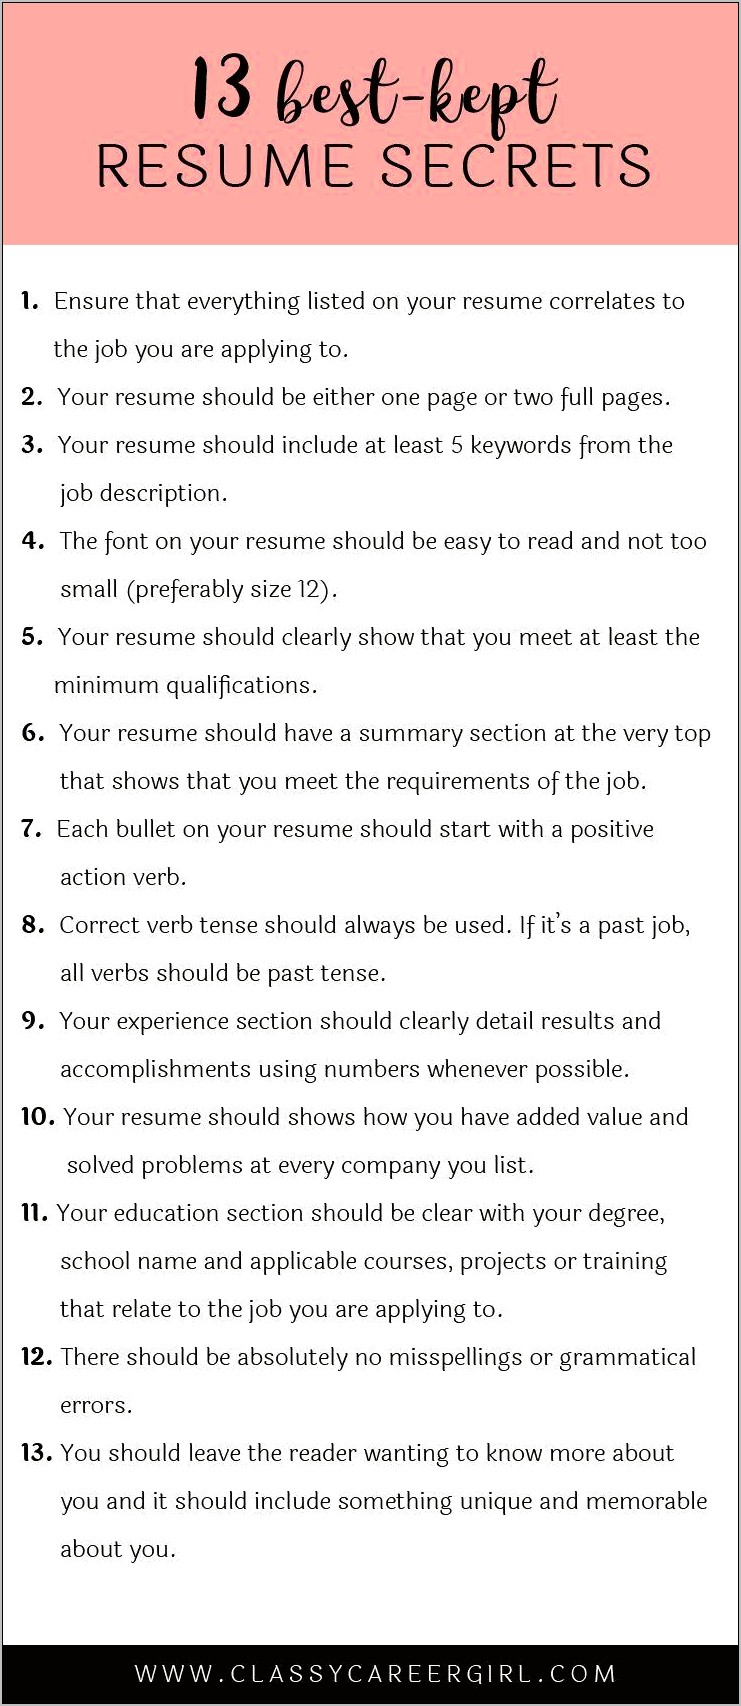 Best Resume Tips Hiring Managers